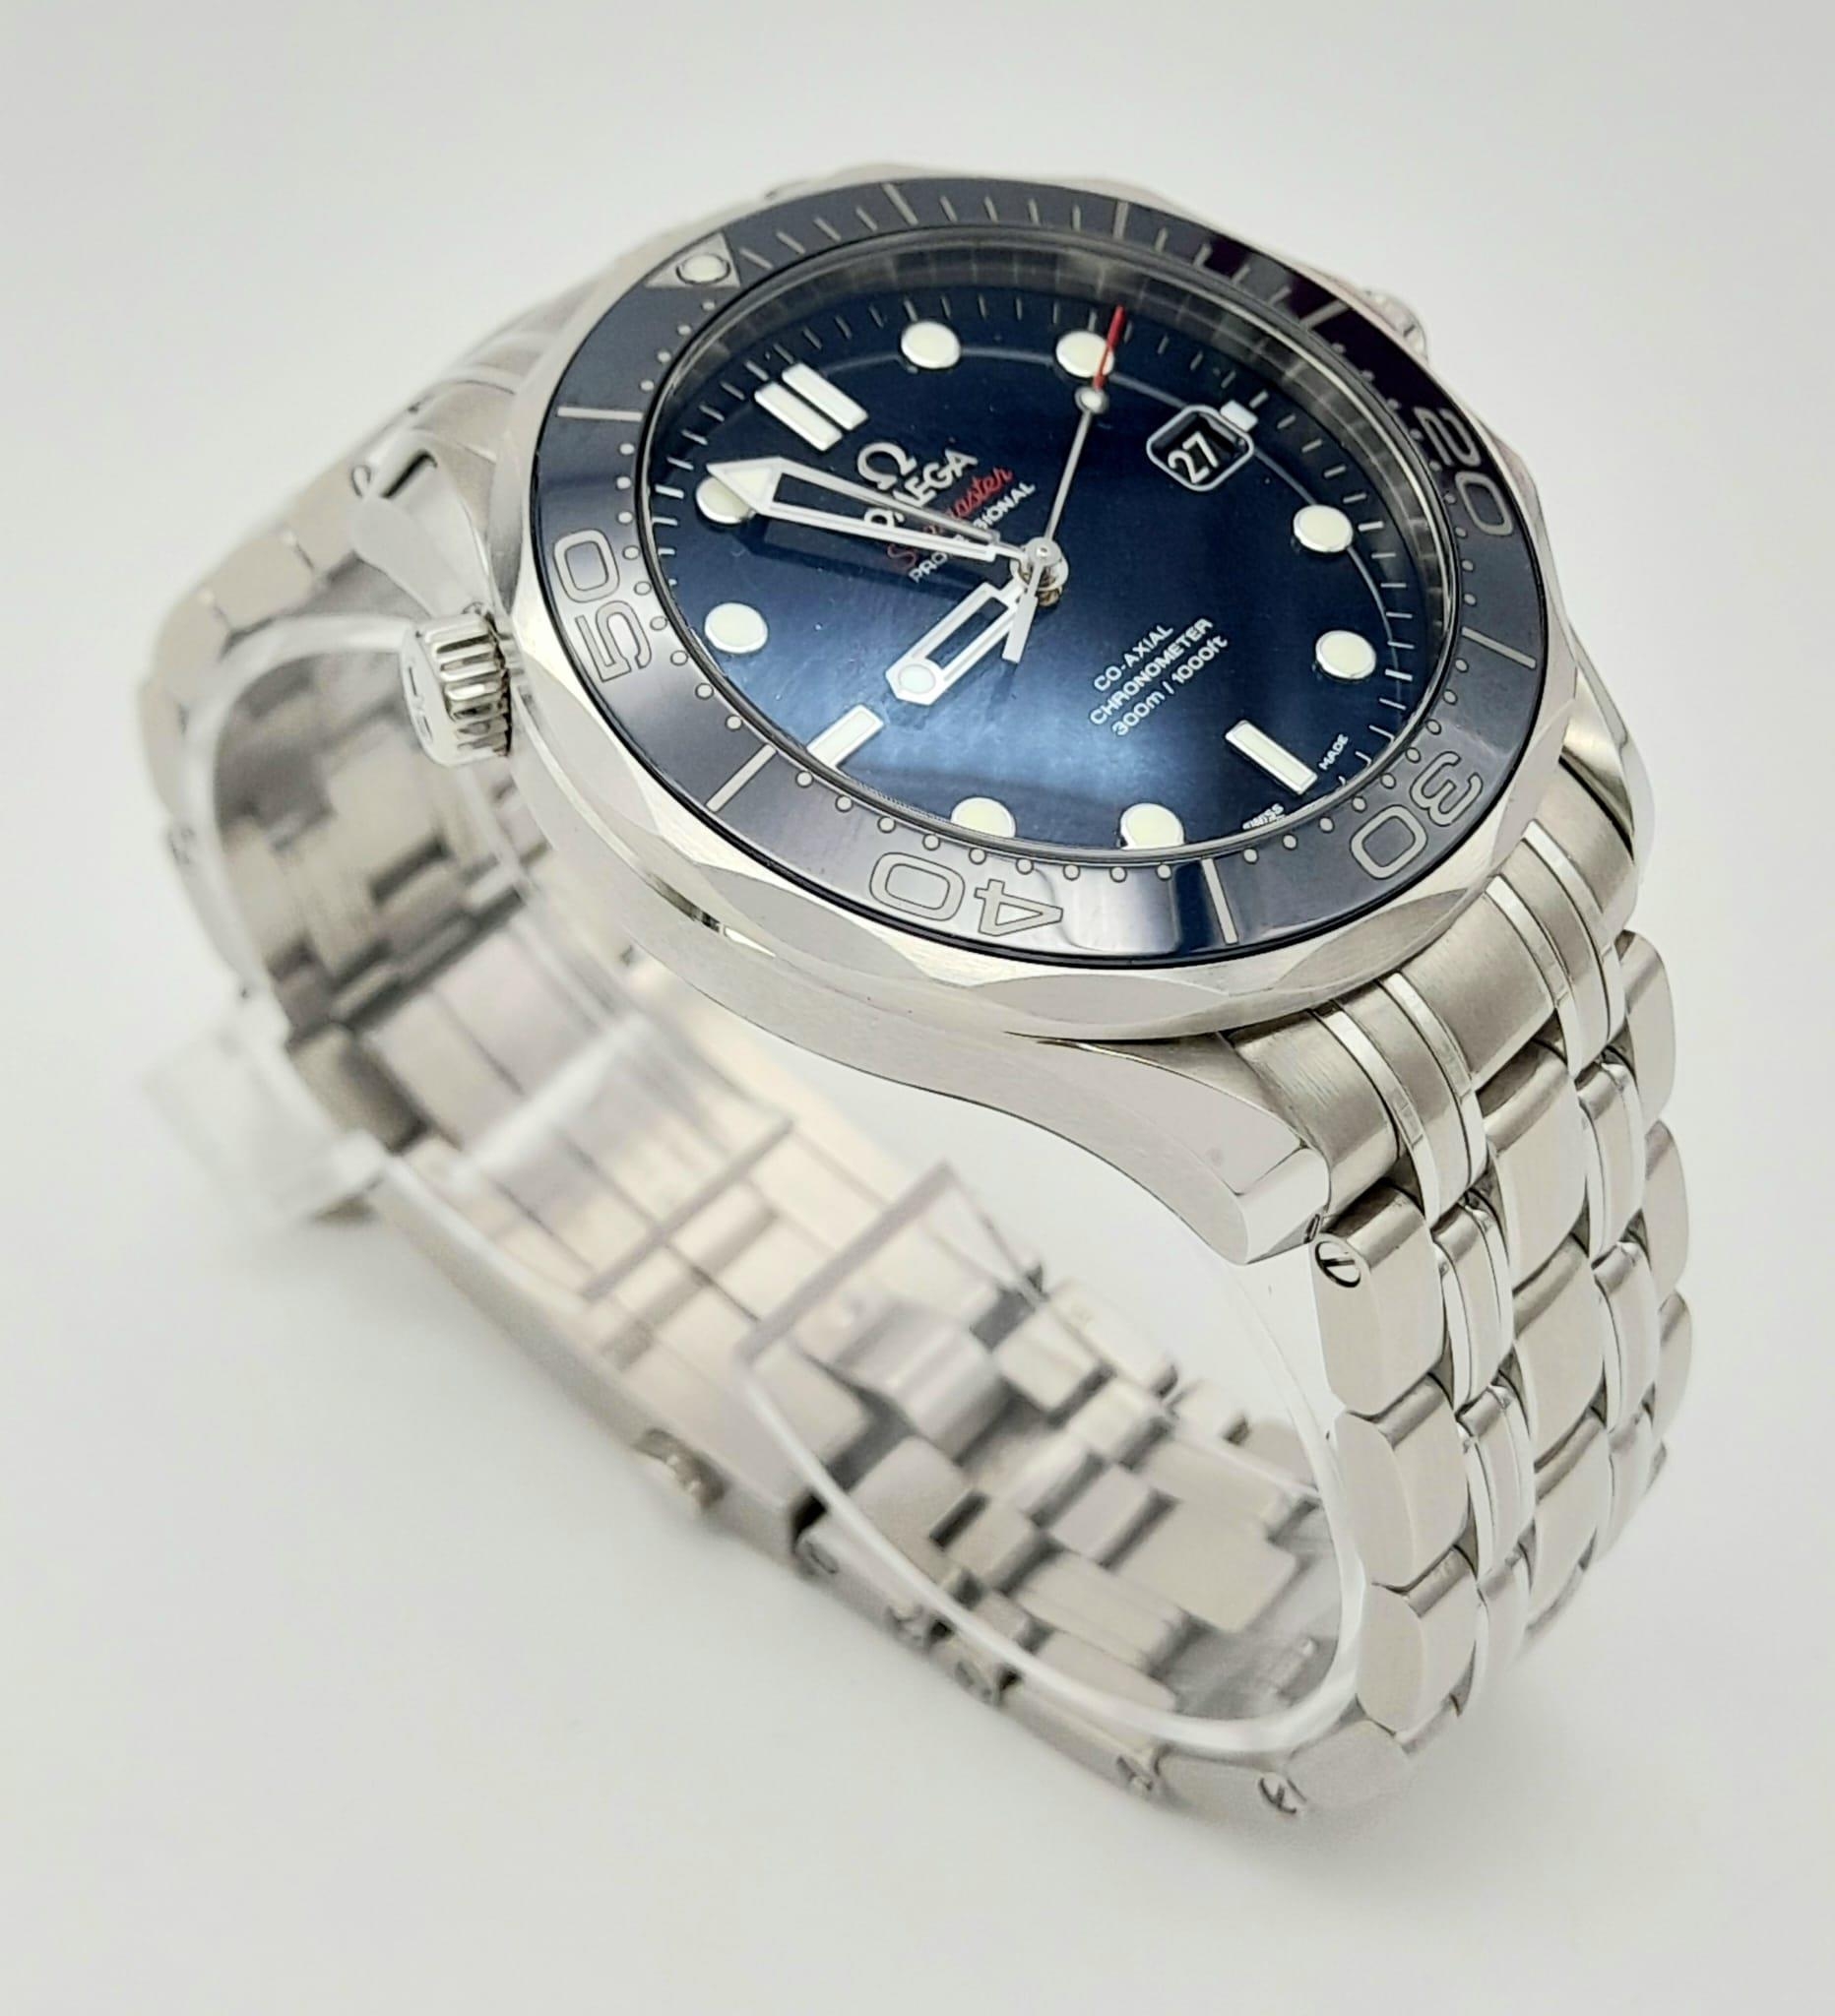 AN OMEGA SEAMASTER "PROFESSIONAL" CHRONOMETER IN STAINLESS STEEL WITH MATCHING BLUE DIAL AND - Image 4 of 29